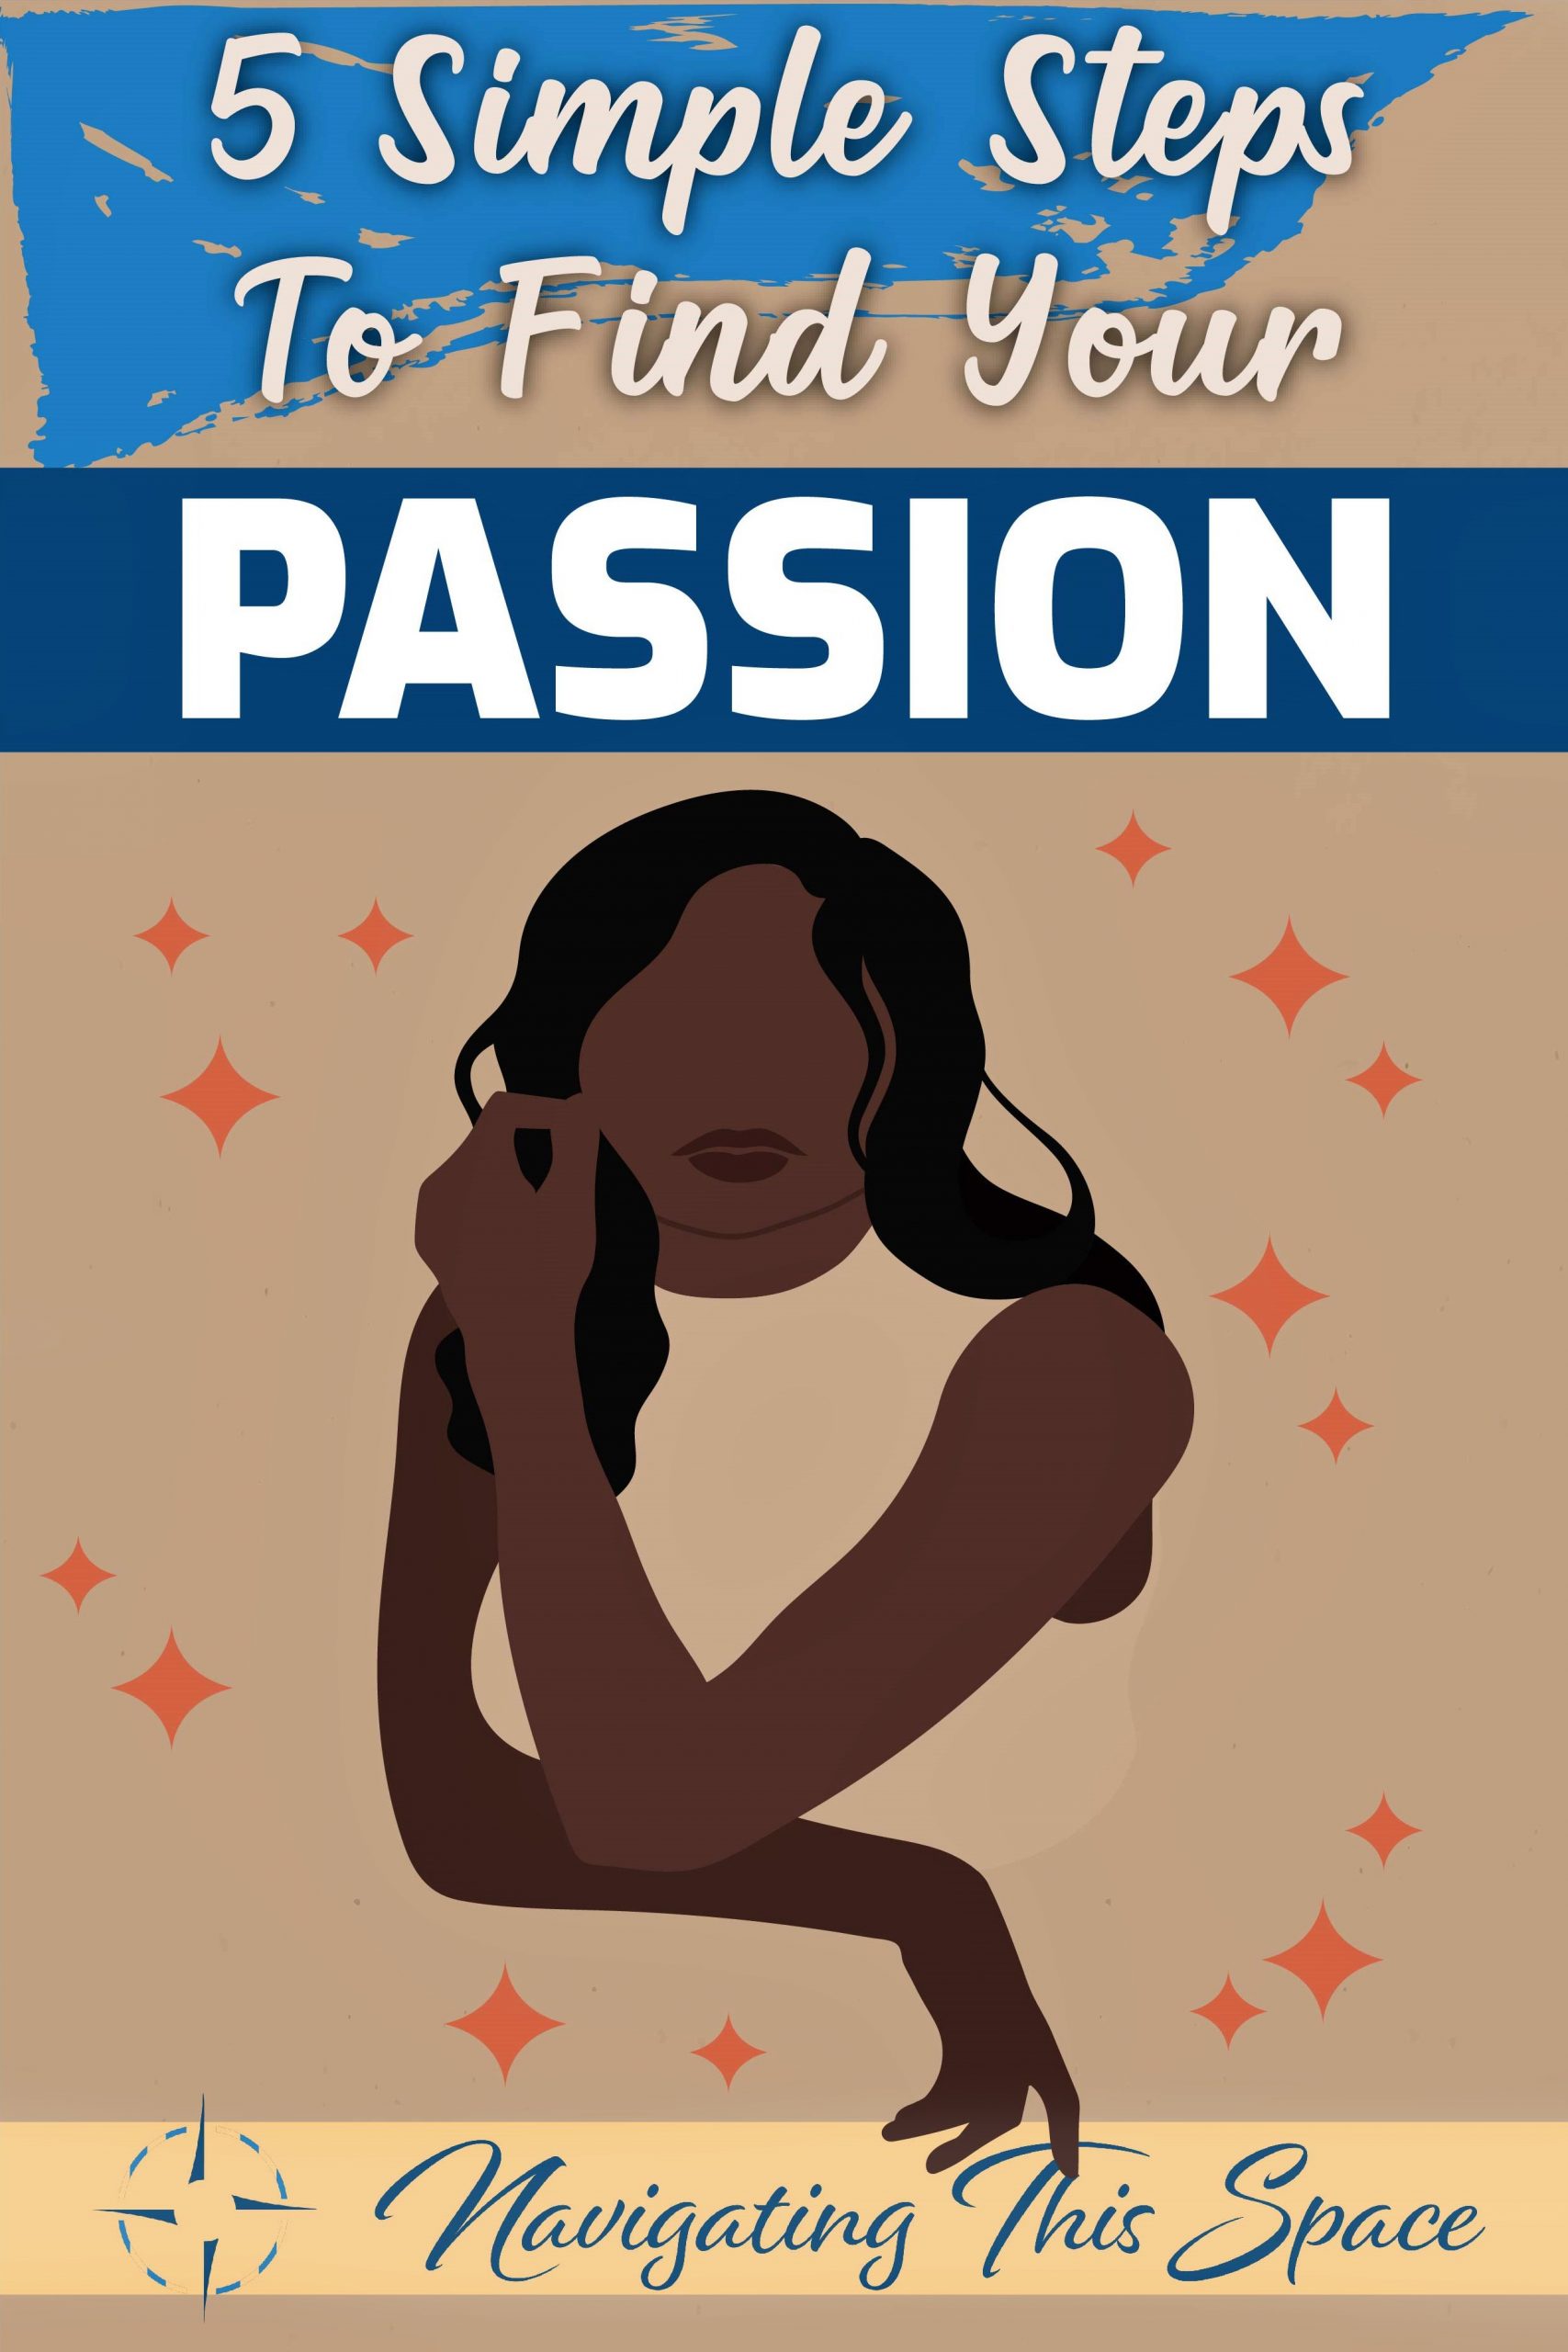 5 Simple steps to find your passion